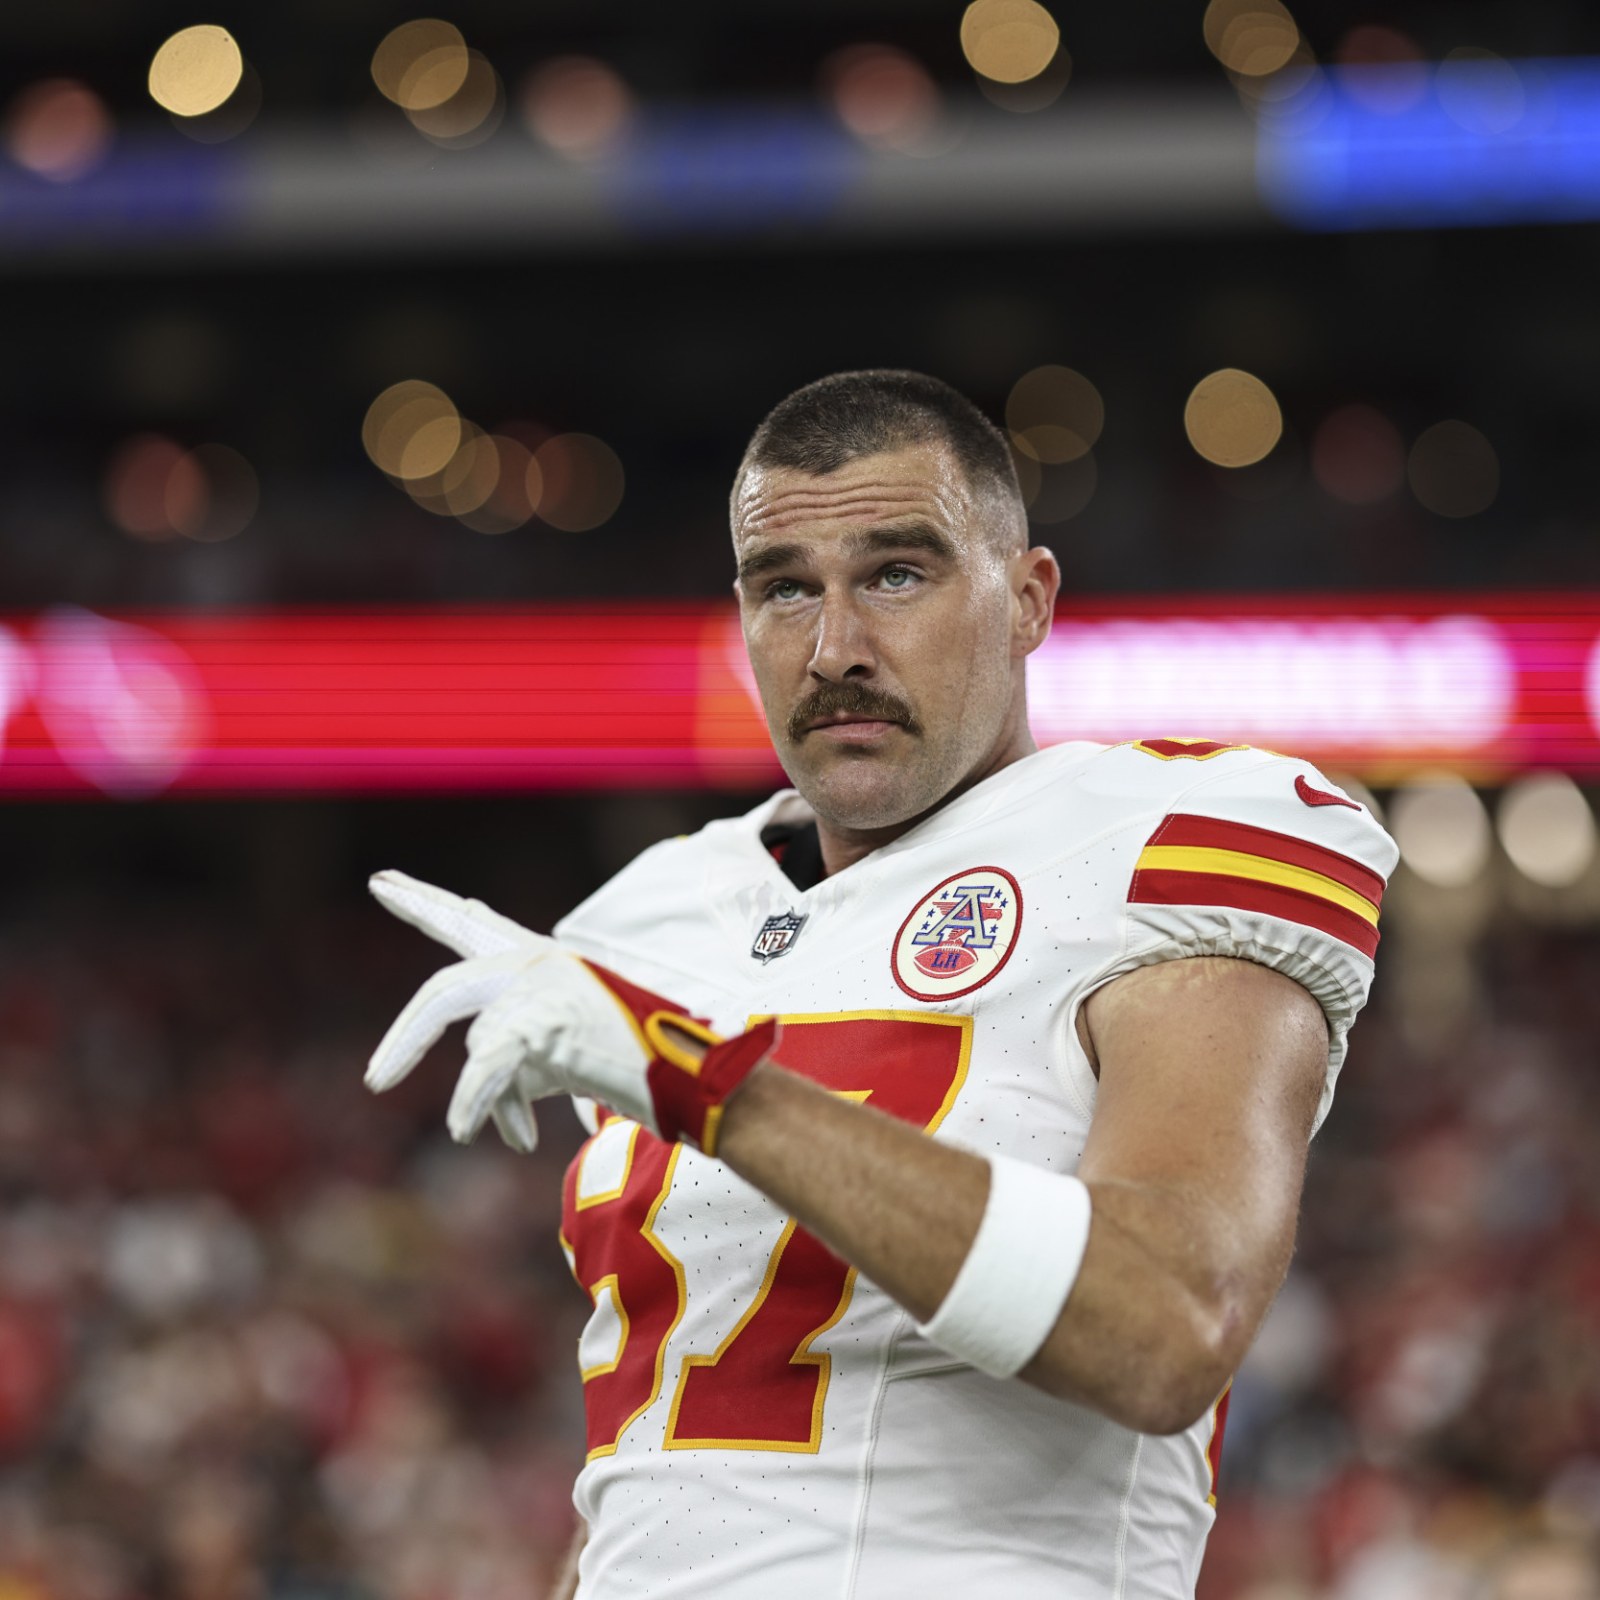 Tight end Travis Kelce wins free beer for his Kansas City Chiefs